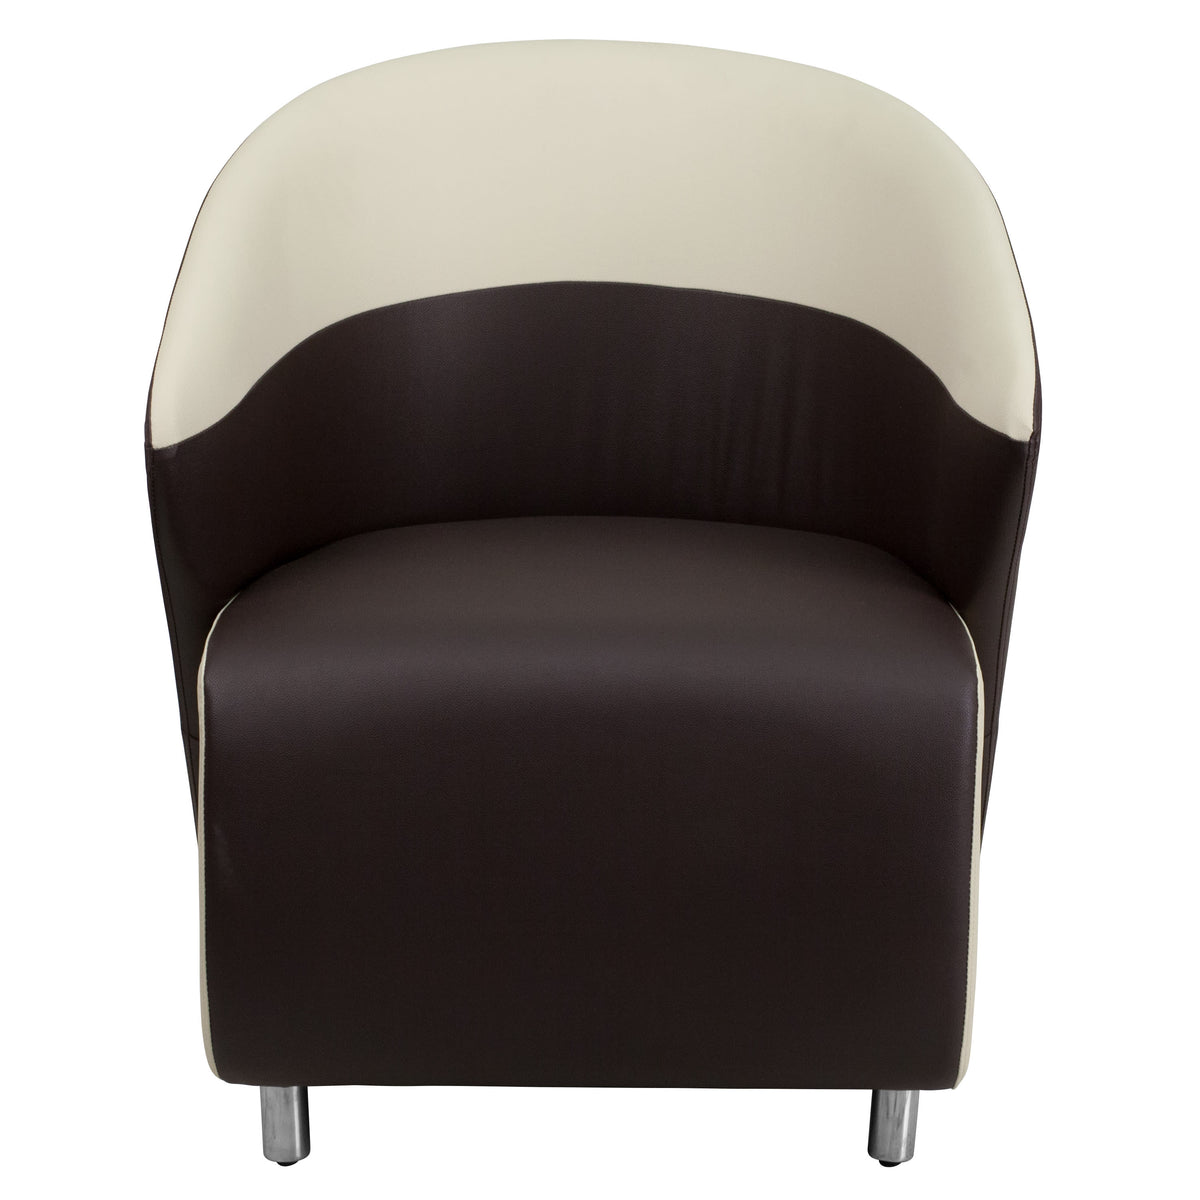 Dark Brown and Beige |#| Dark Brown LeatherSoft Curved Barrel Back Lounge Chair with Beige Detailing